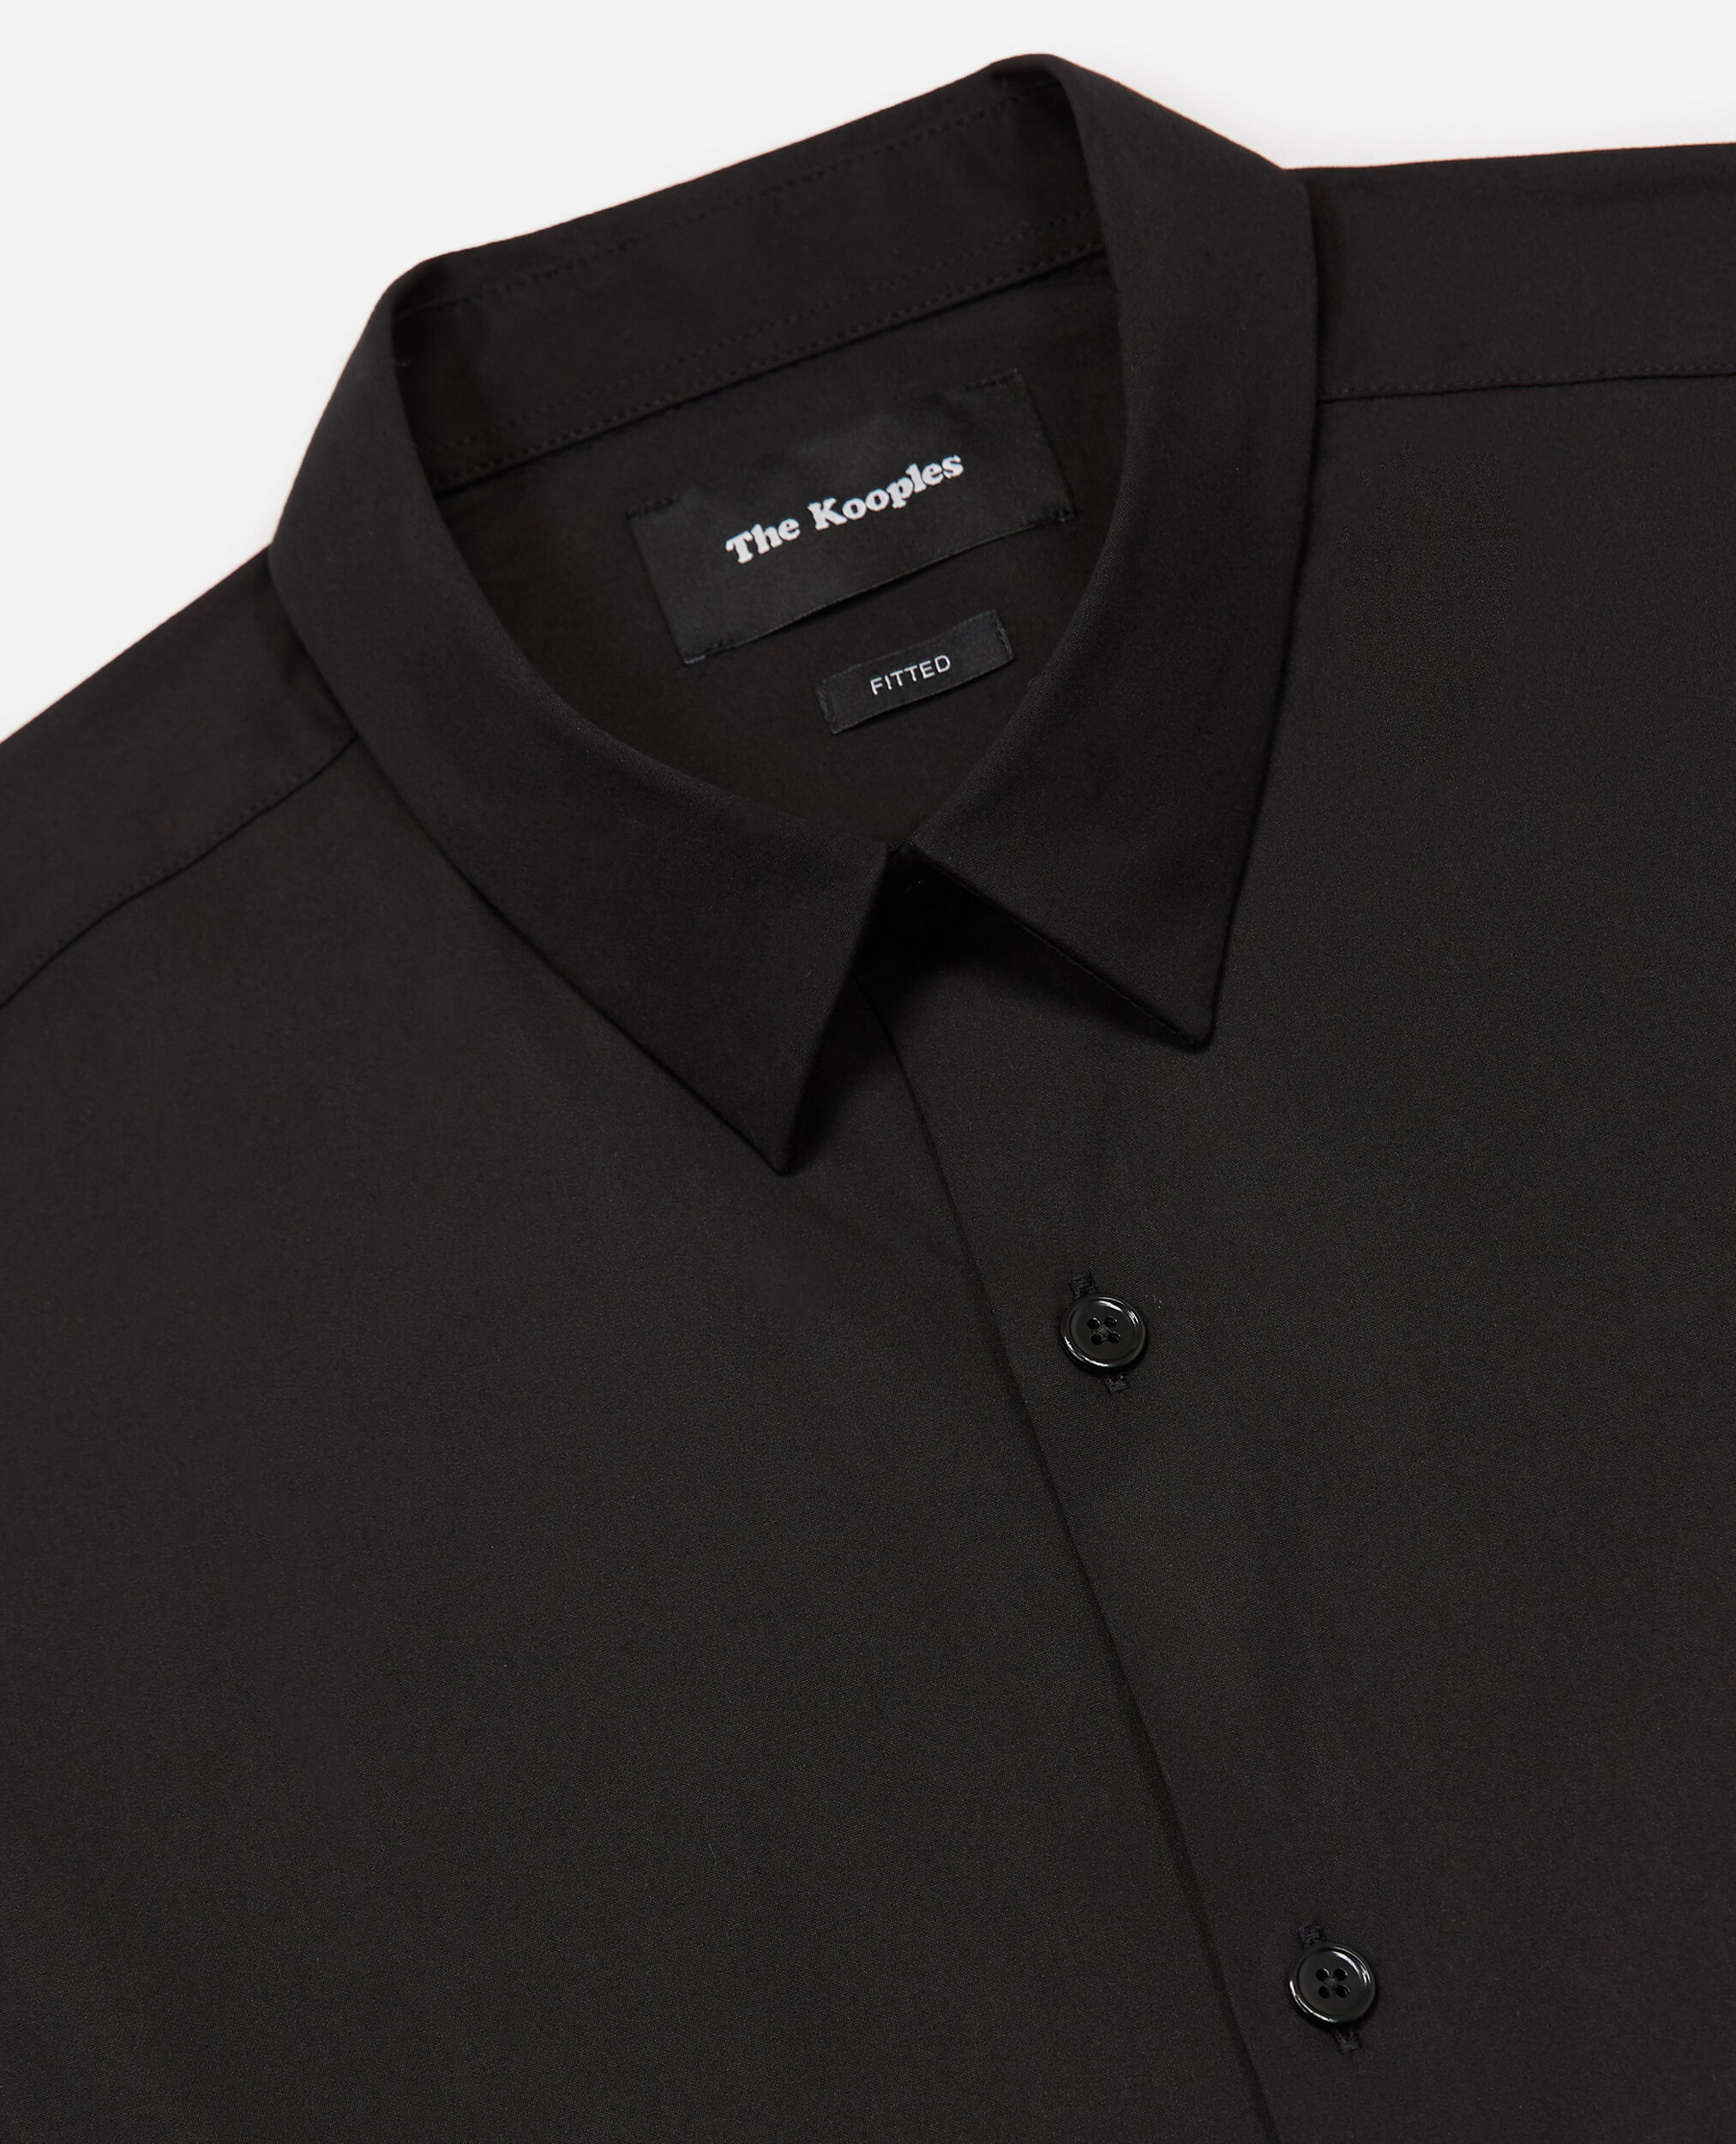 Fitted black shirt with buttoned collar, BLACK, hi-res image number null